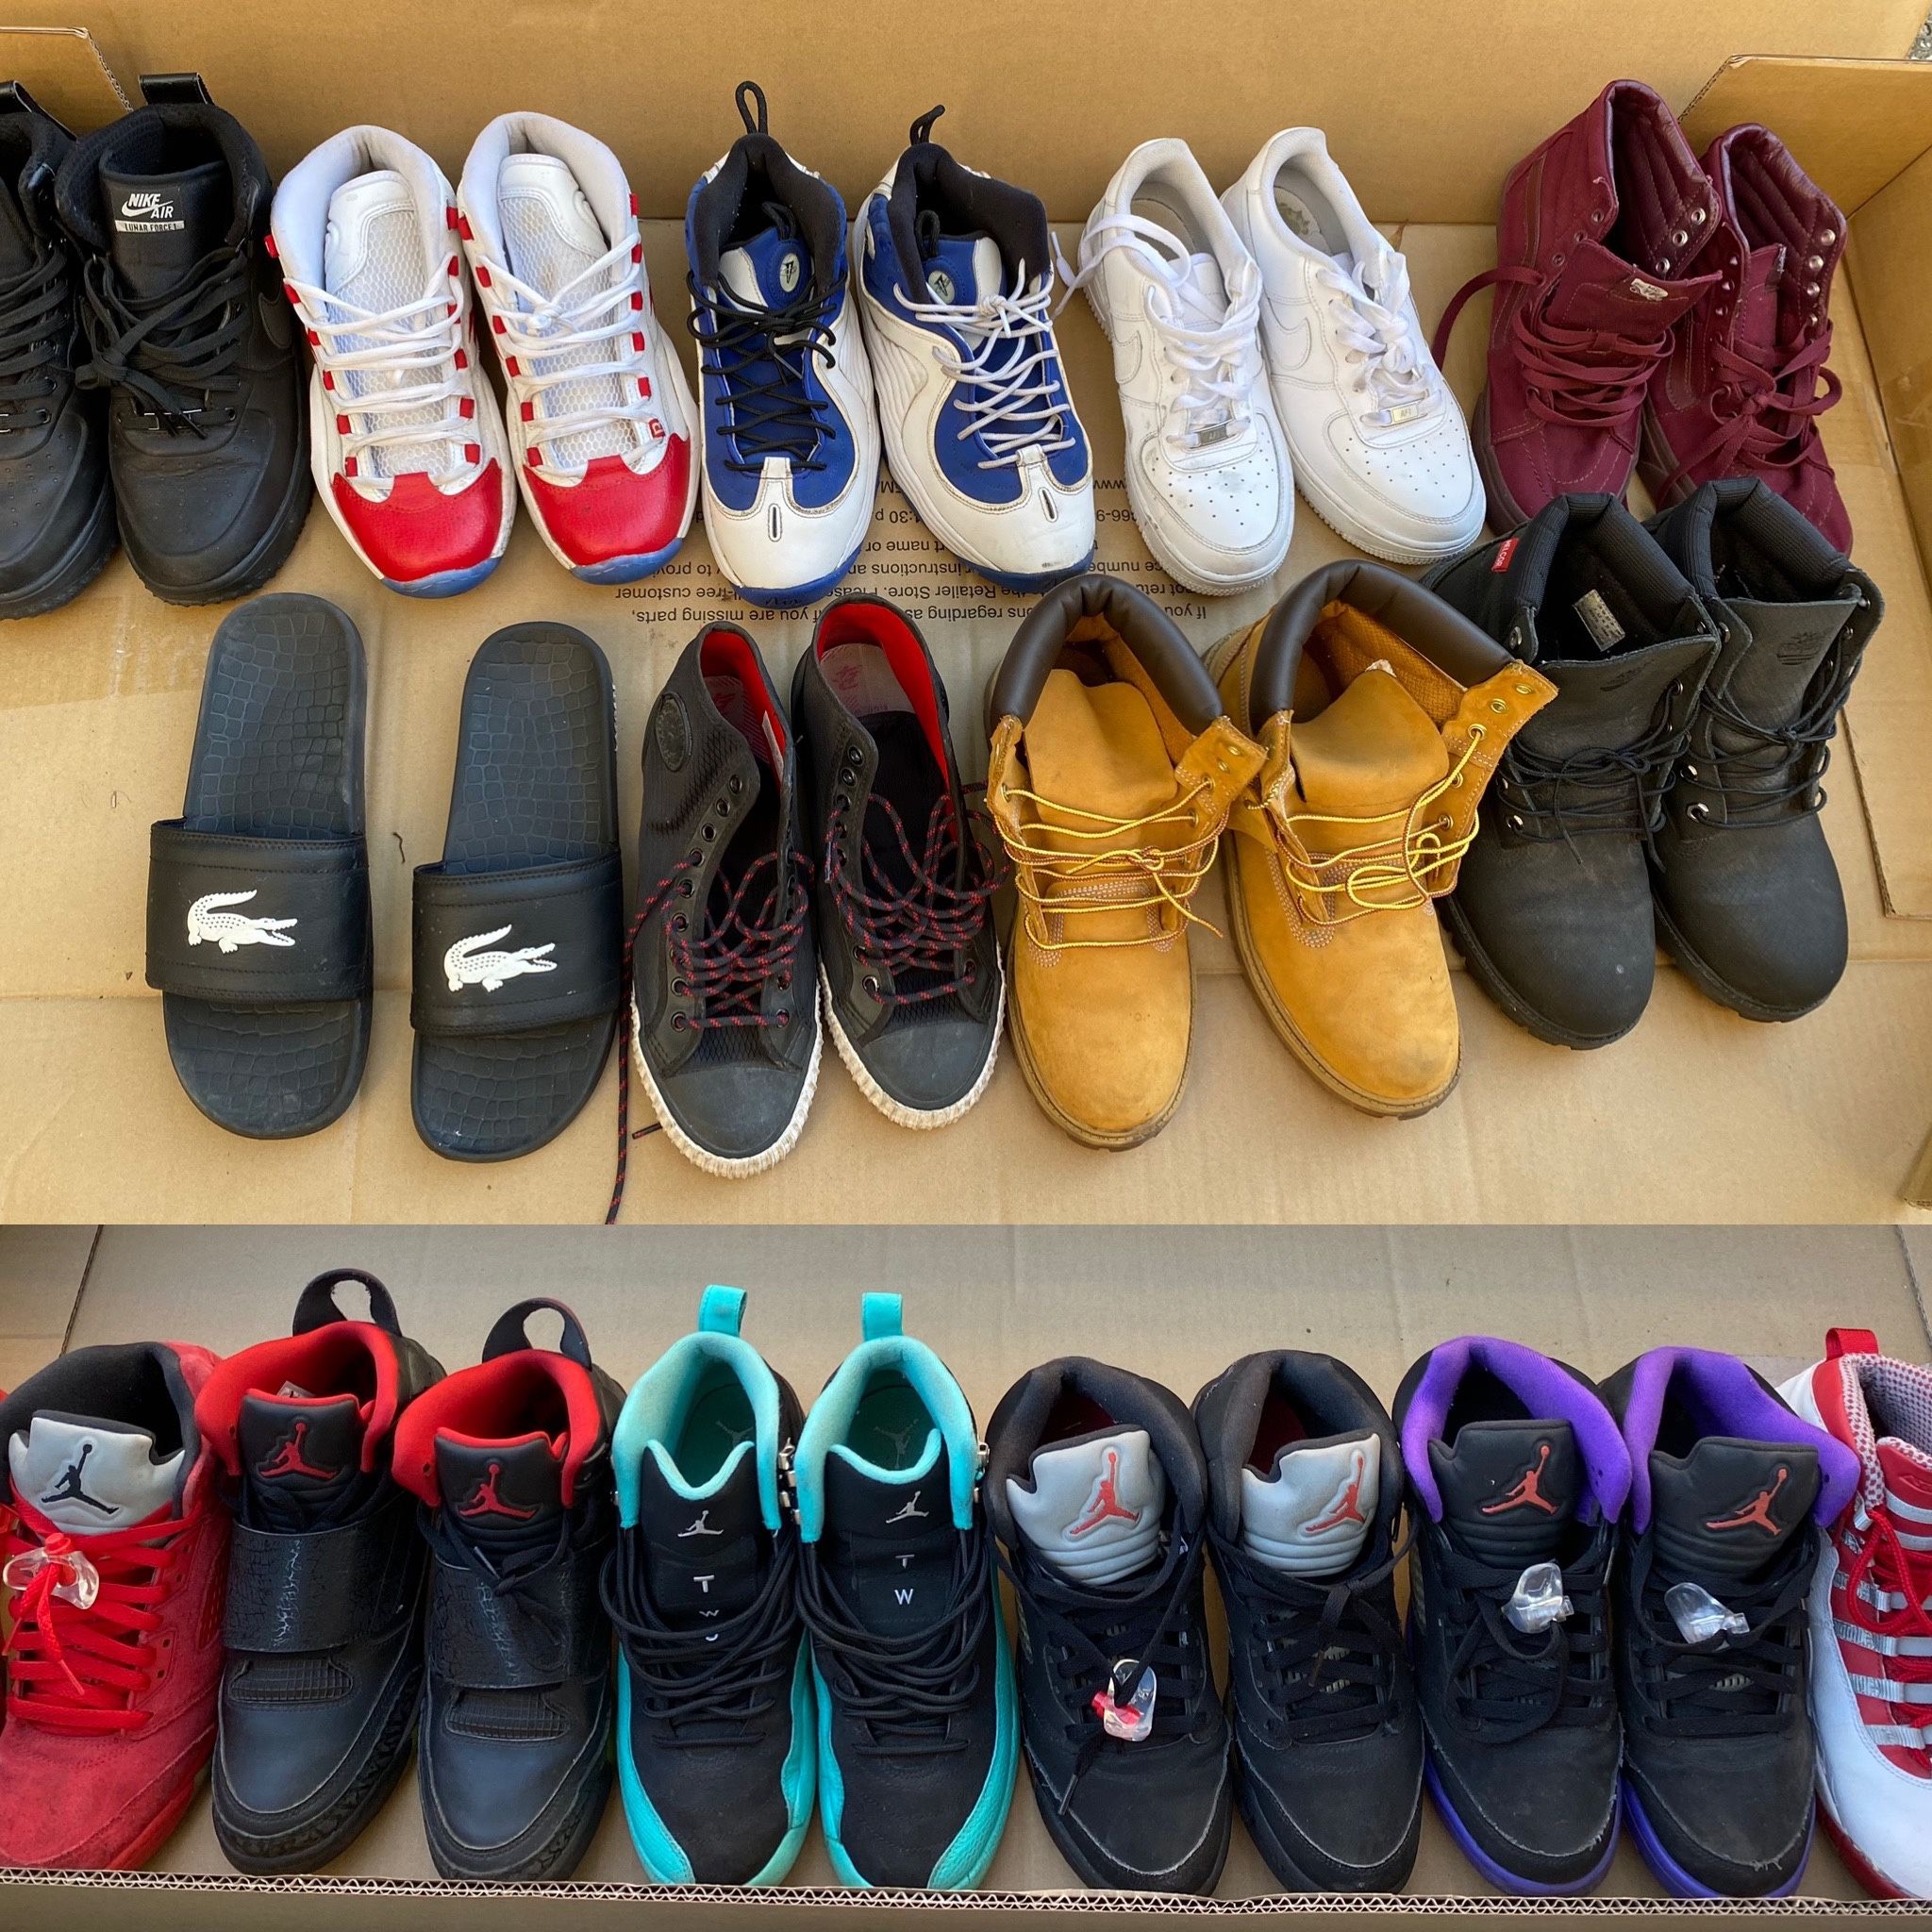 Lot of Jordan’s, Nikes, and Others.